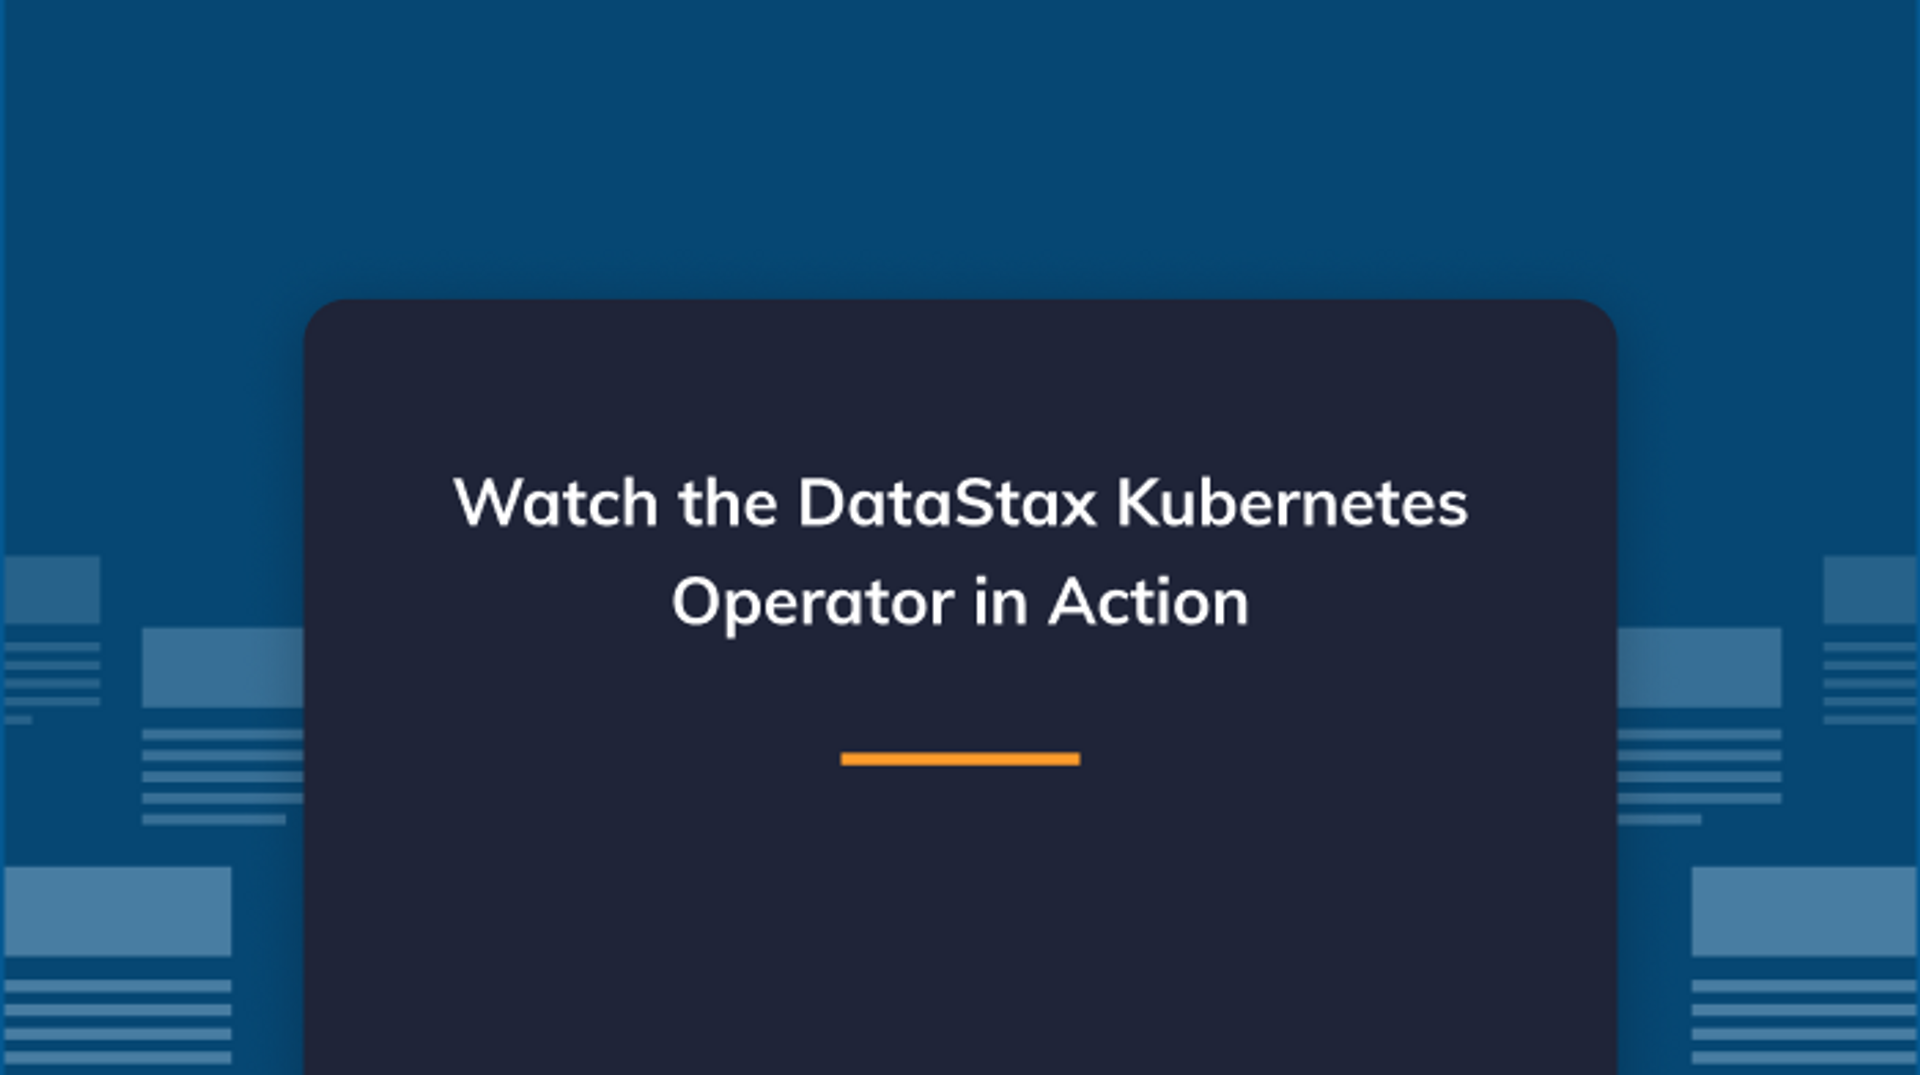 Watch the DataStax Kubernetes Operator in Action